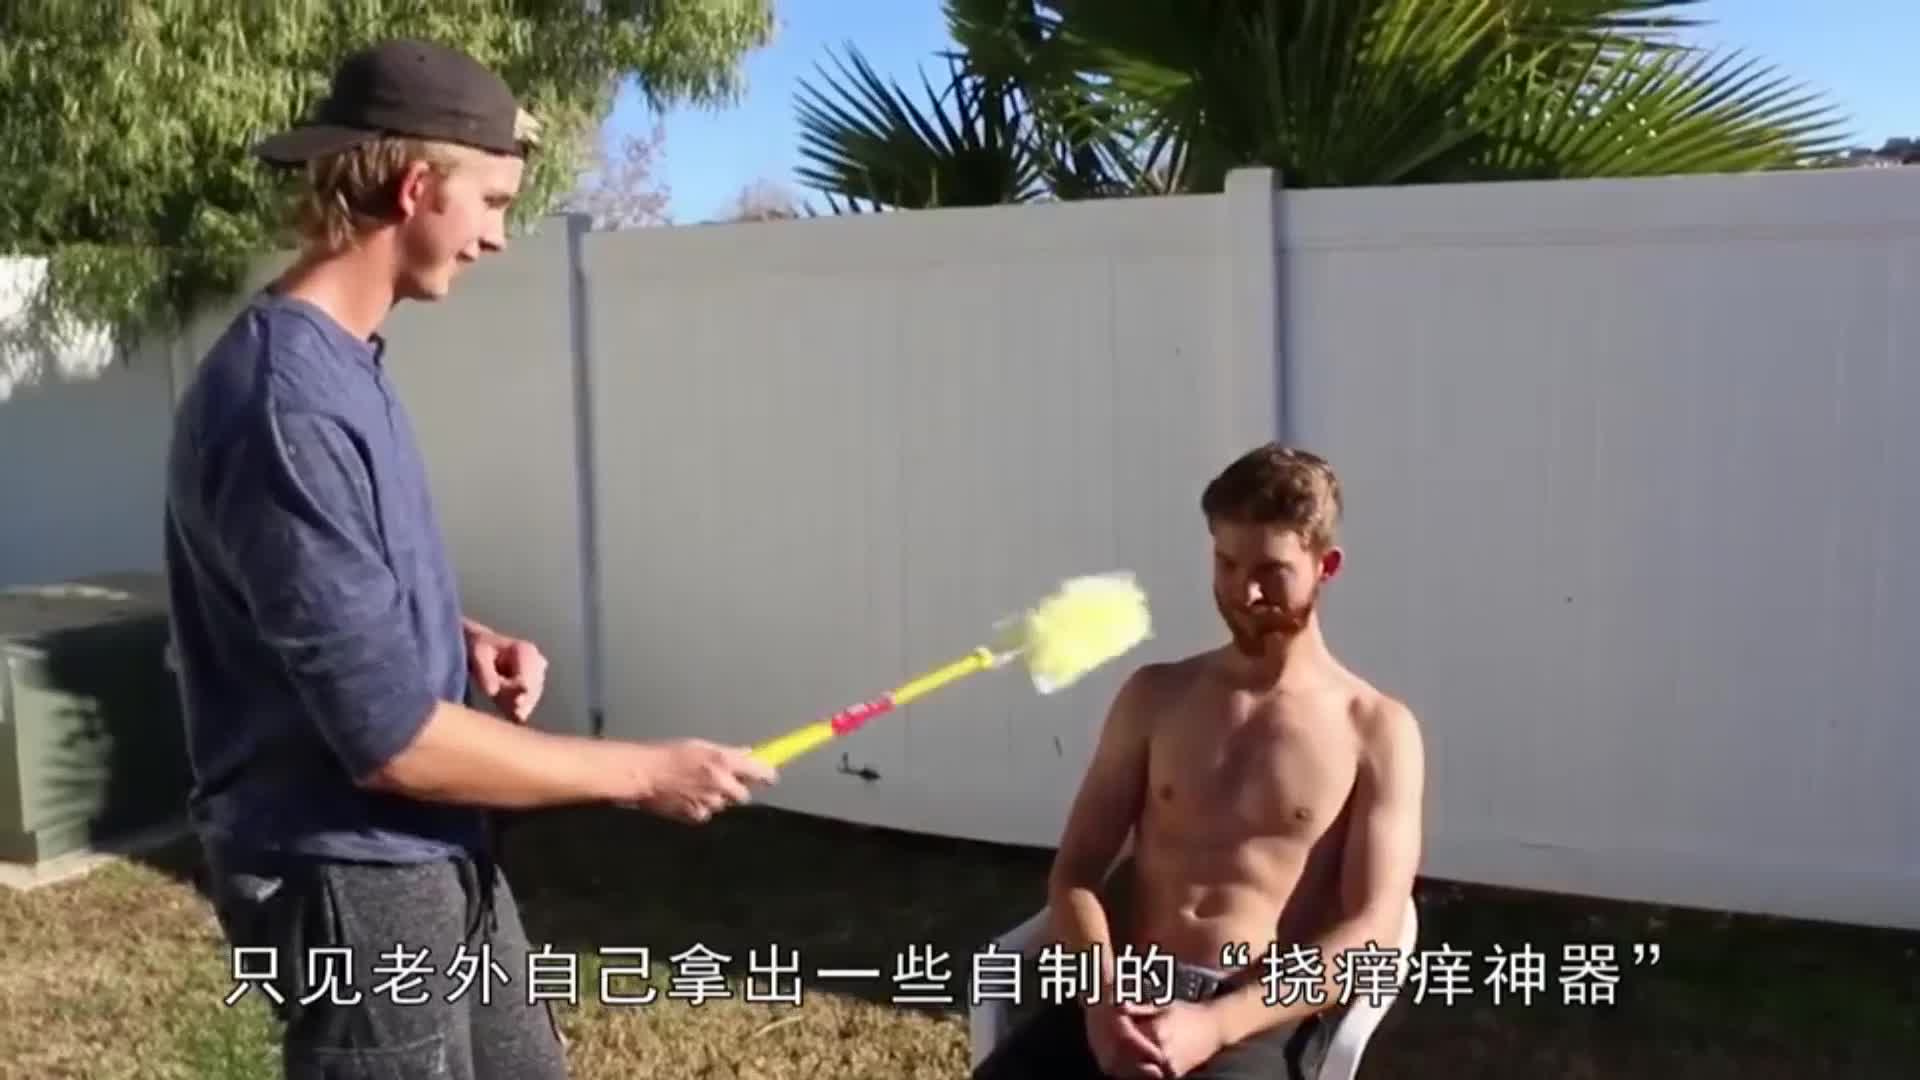 When foreigners hold a wonderful flower 